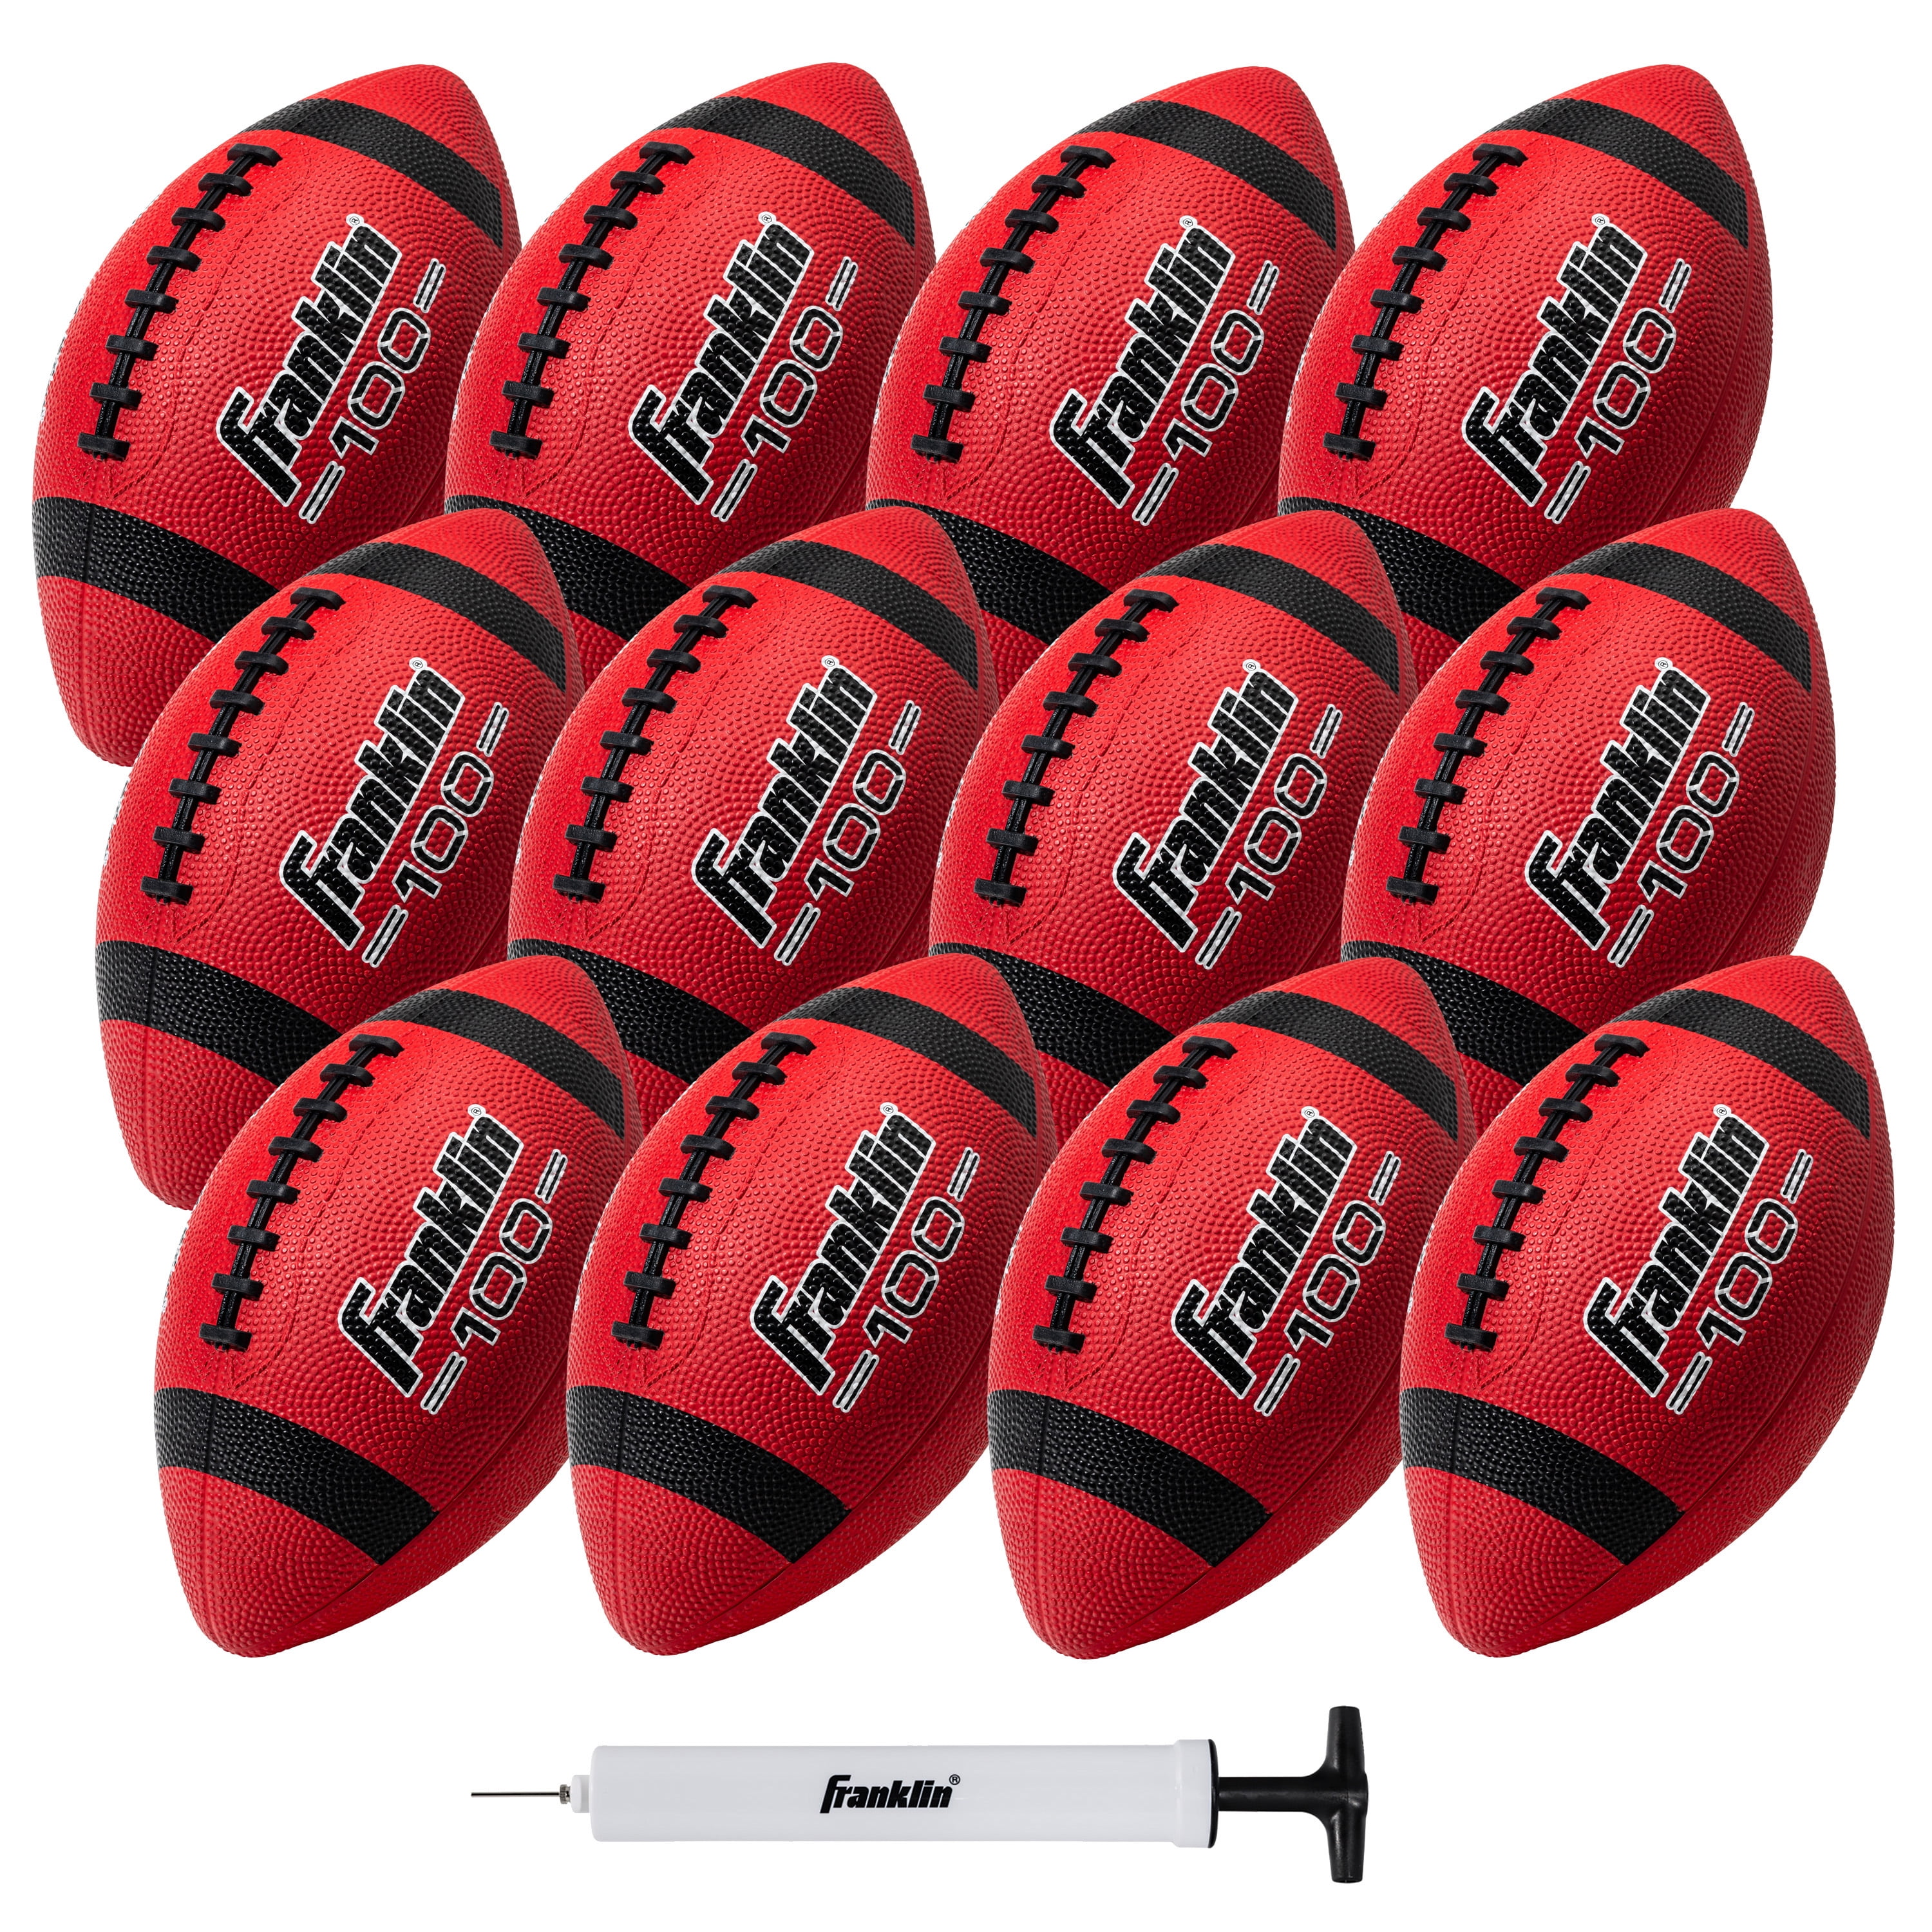 Needle Sport Rugby Ball Basketball 55 Sport Double Action Football Hand Pump 